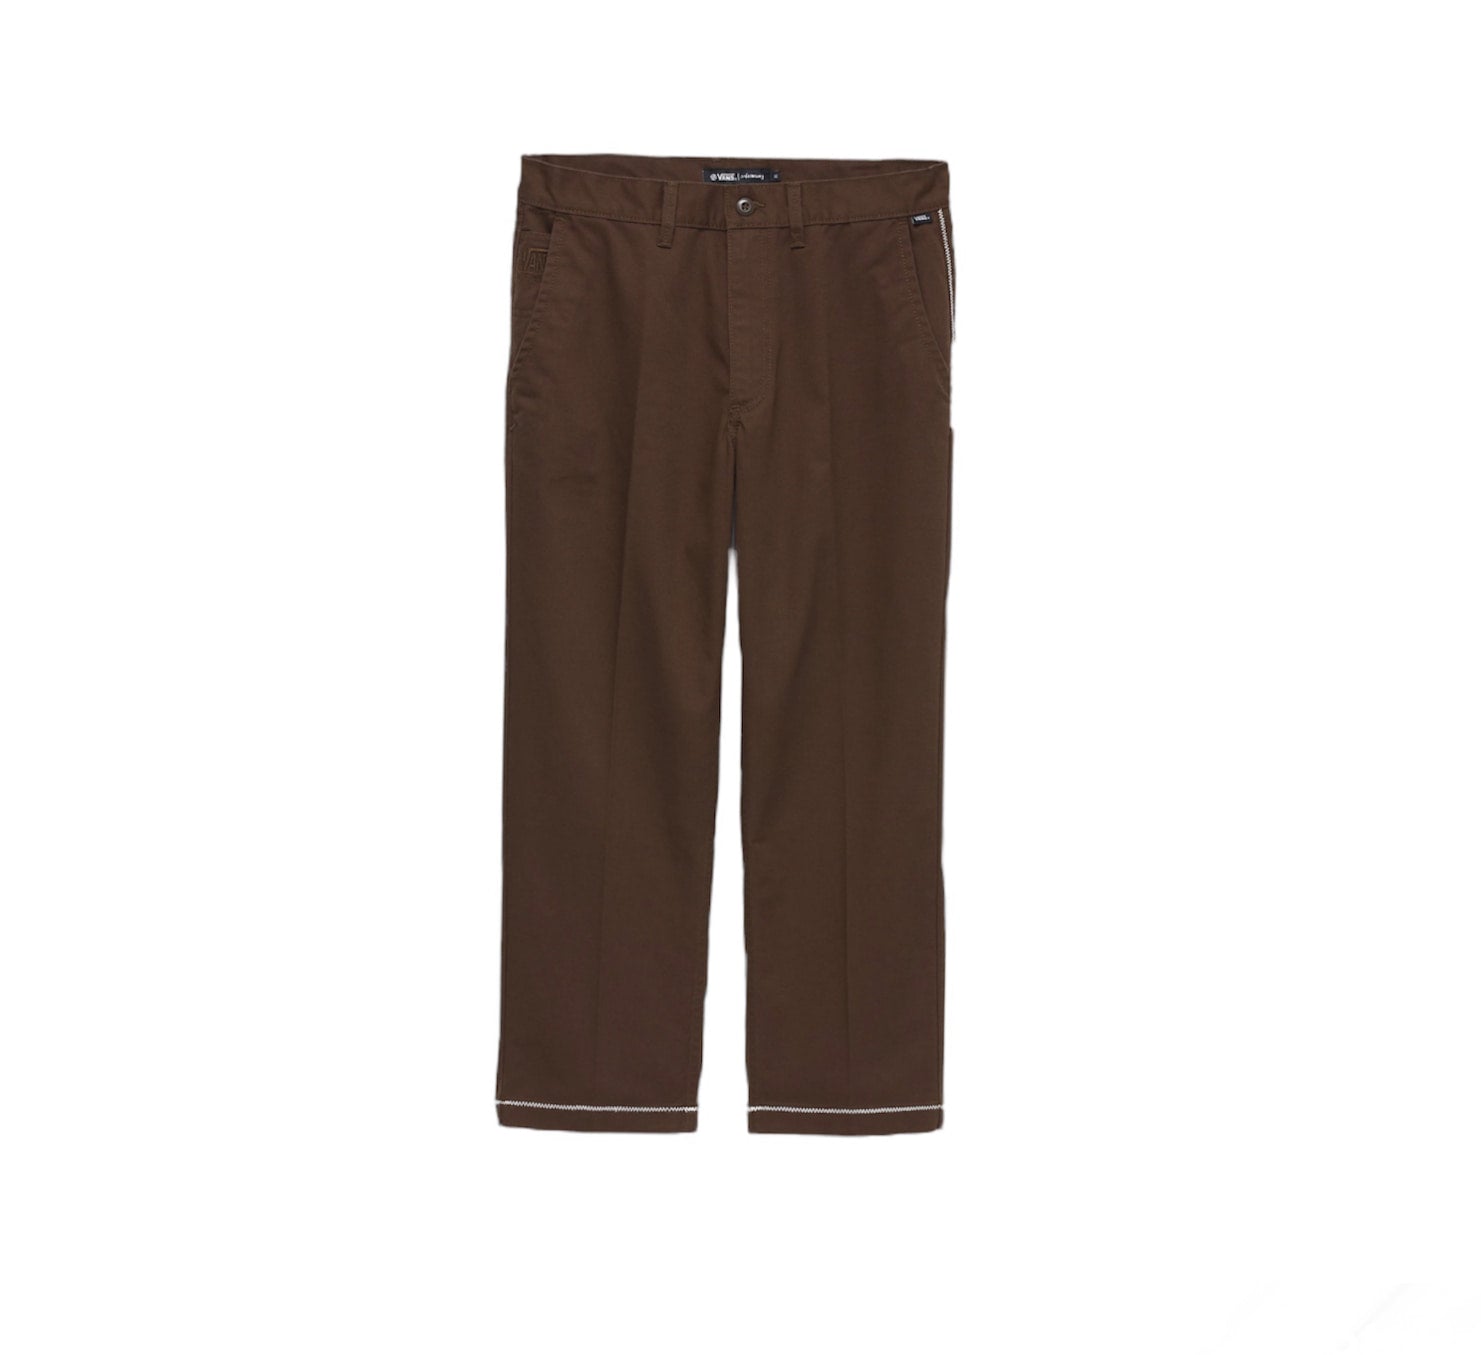 VANS x Mikey February Pants Brown